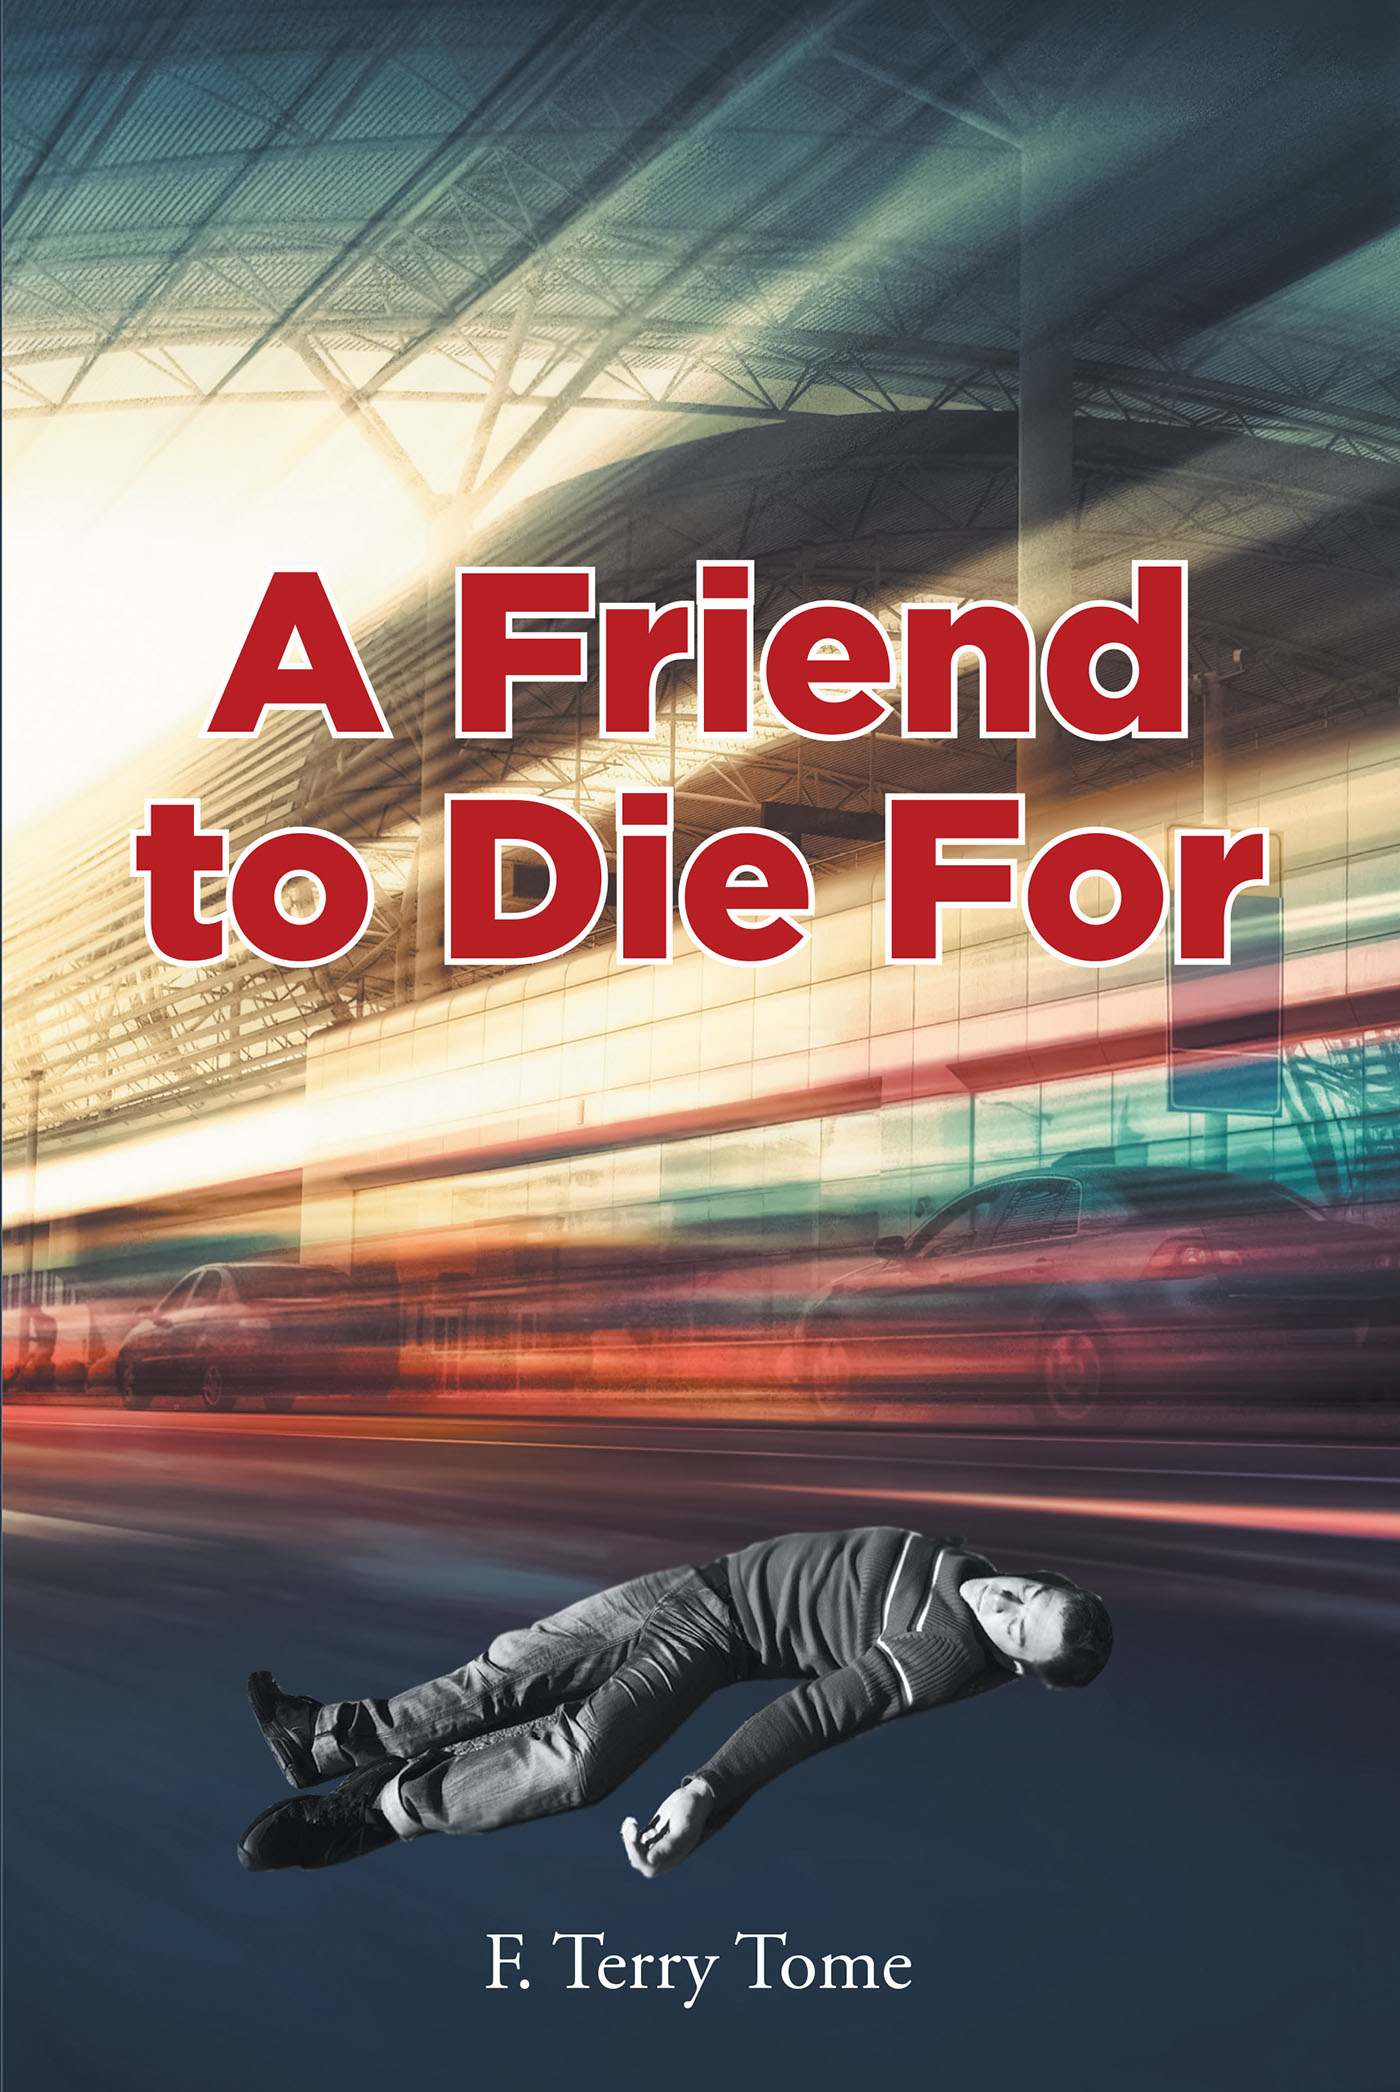 F. Terry Tome’s Newly Released “A Friend to Die For” is a Thrilling Race to Discover Who is Behind a Shocking Attack on a Local Private Eye